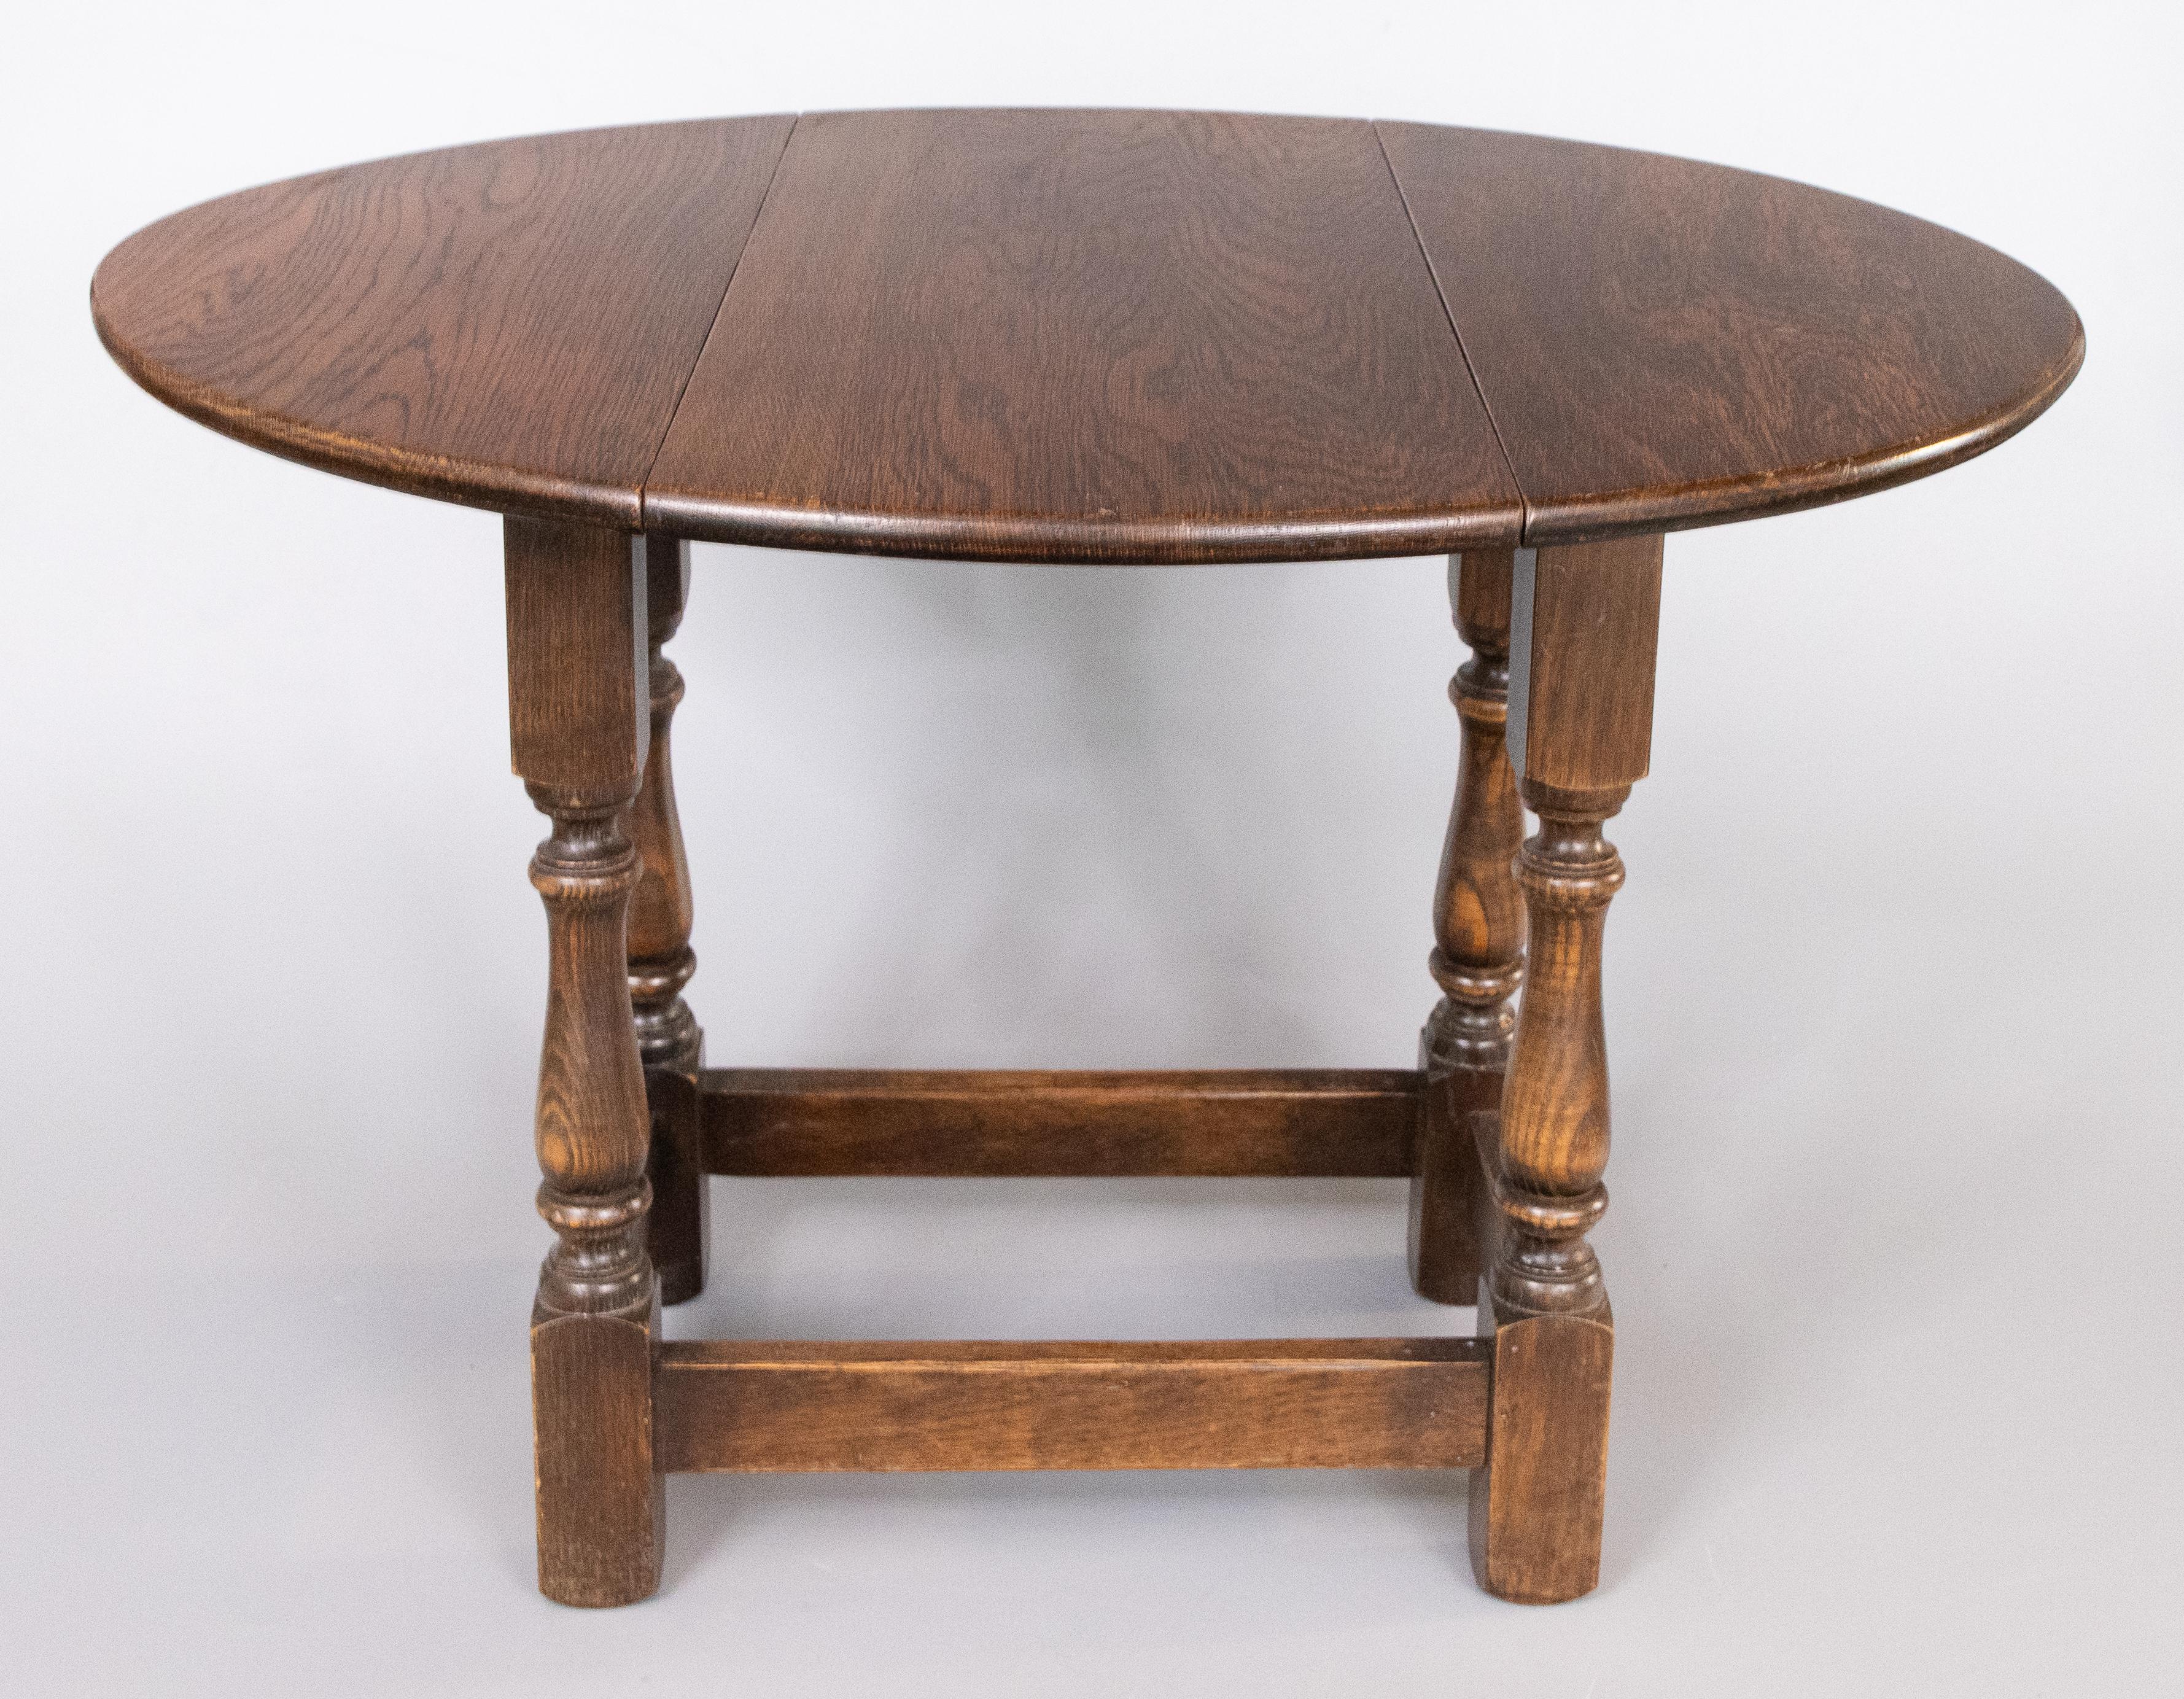 Period swivel top low table, with hinged drop leaves, on baluster turned legs united by stretchers. Table tape width 9.5